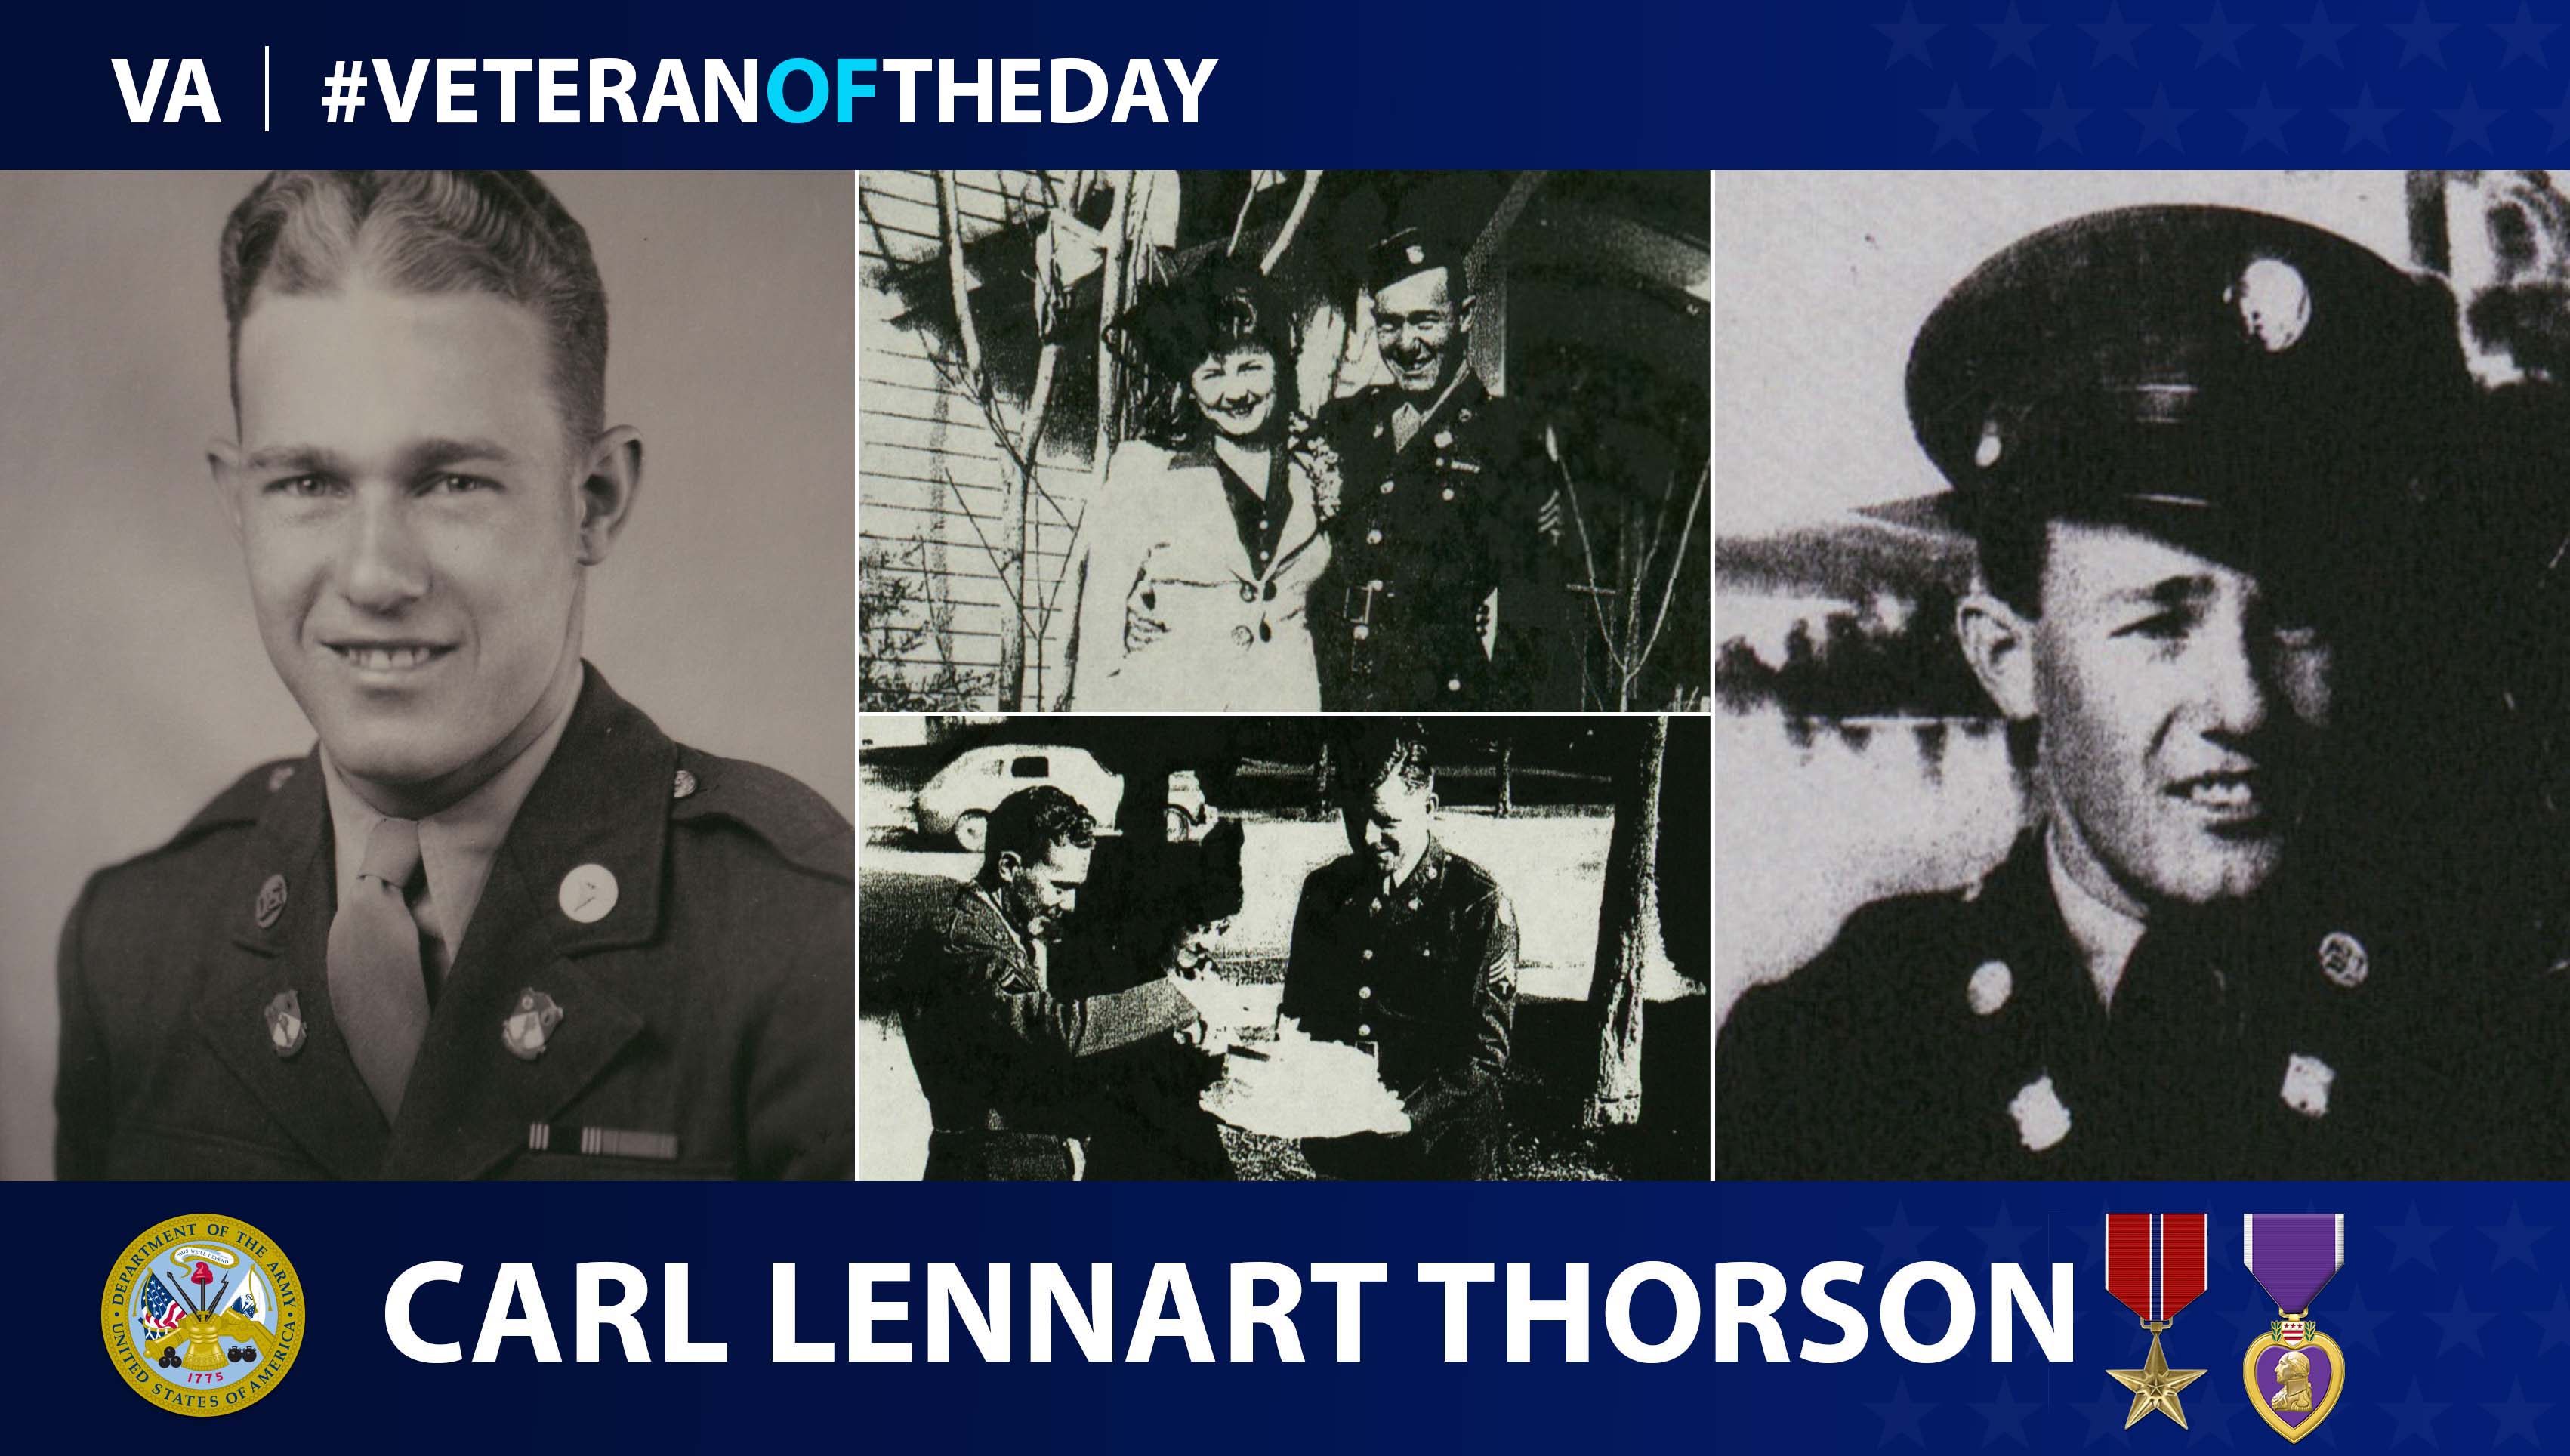 Army Veteran Carl Lennart Thorson is today's Veteran of the Day.